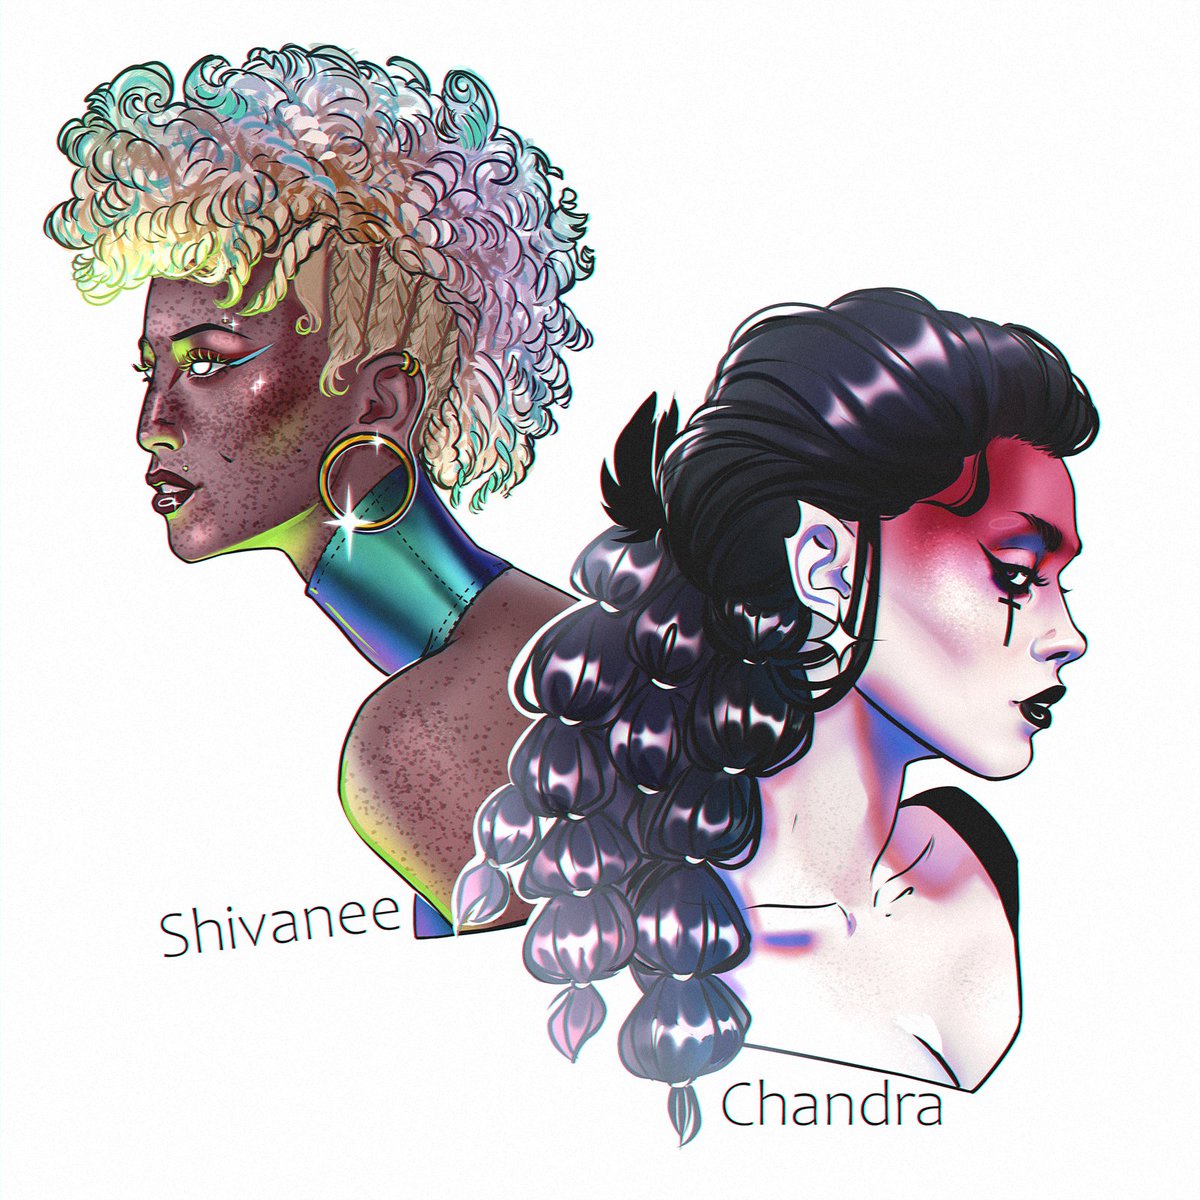 — oc: chandra and shivanee background characters from my project priestess of love Chandra and barmaid in 'пурпати' [reads like a 'poor party'] Shivanee. you've already seen Chandra, she's on the H8's tattoo.